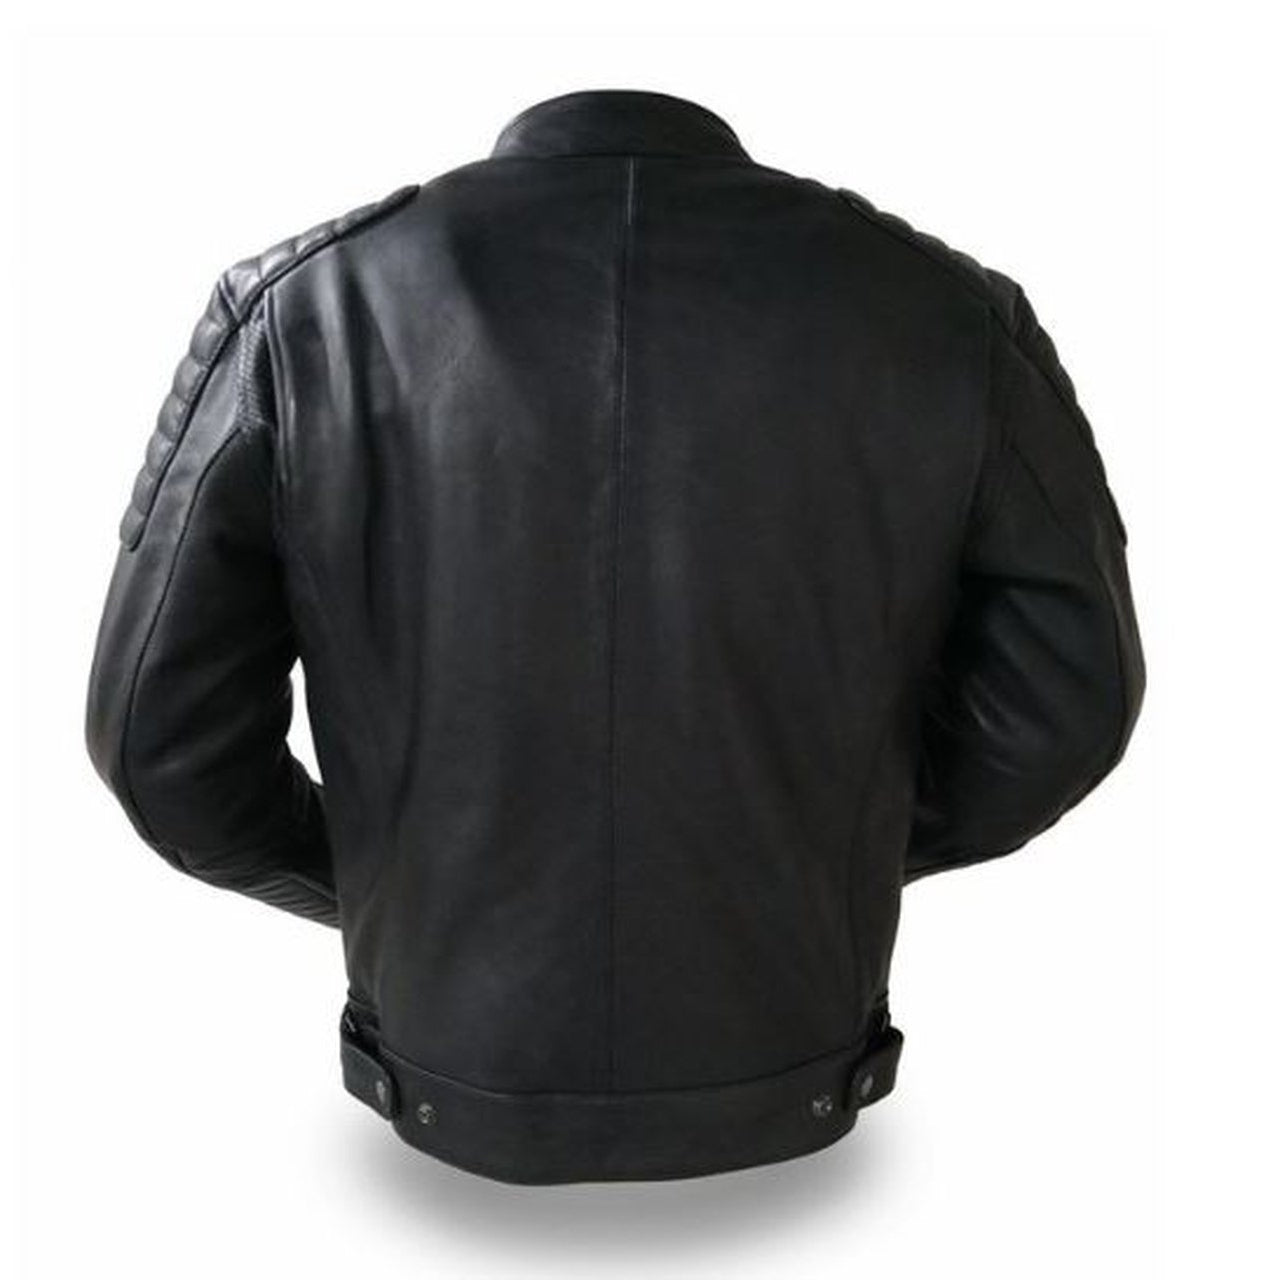 Leather Motorcycle Jacket Stripes on Shoulder and Chest for Men - Leather Jacket